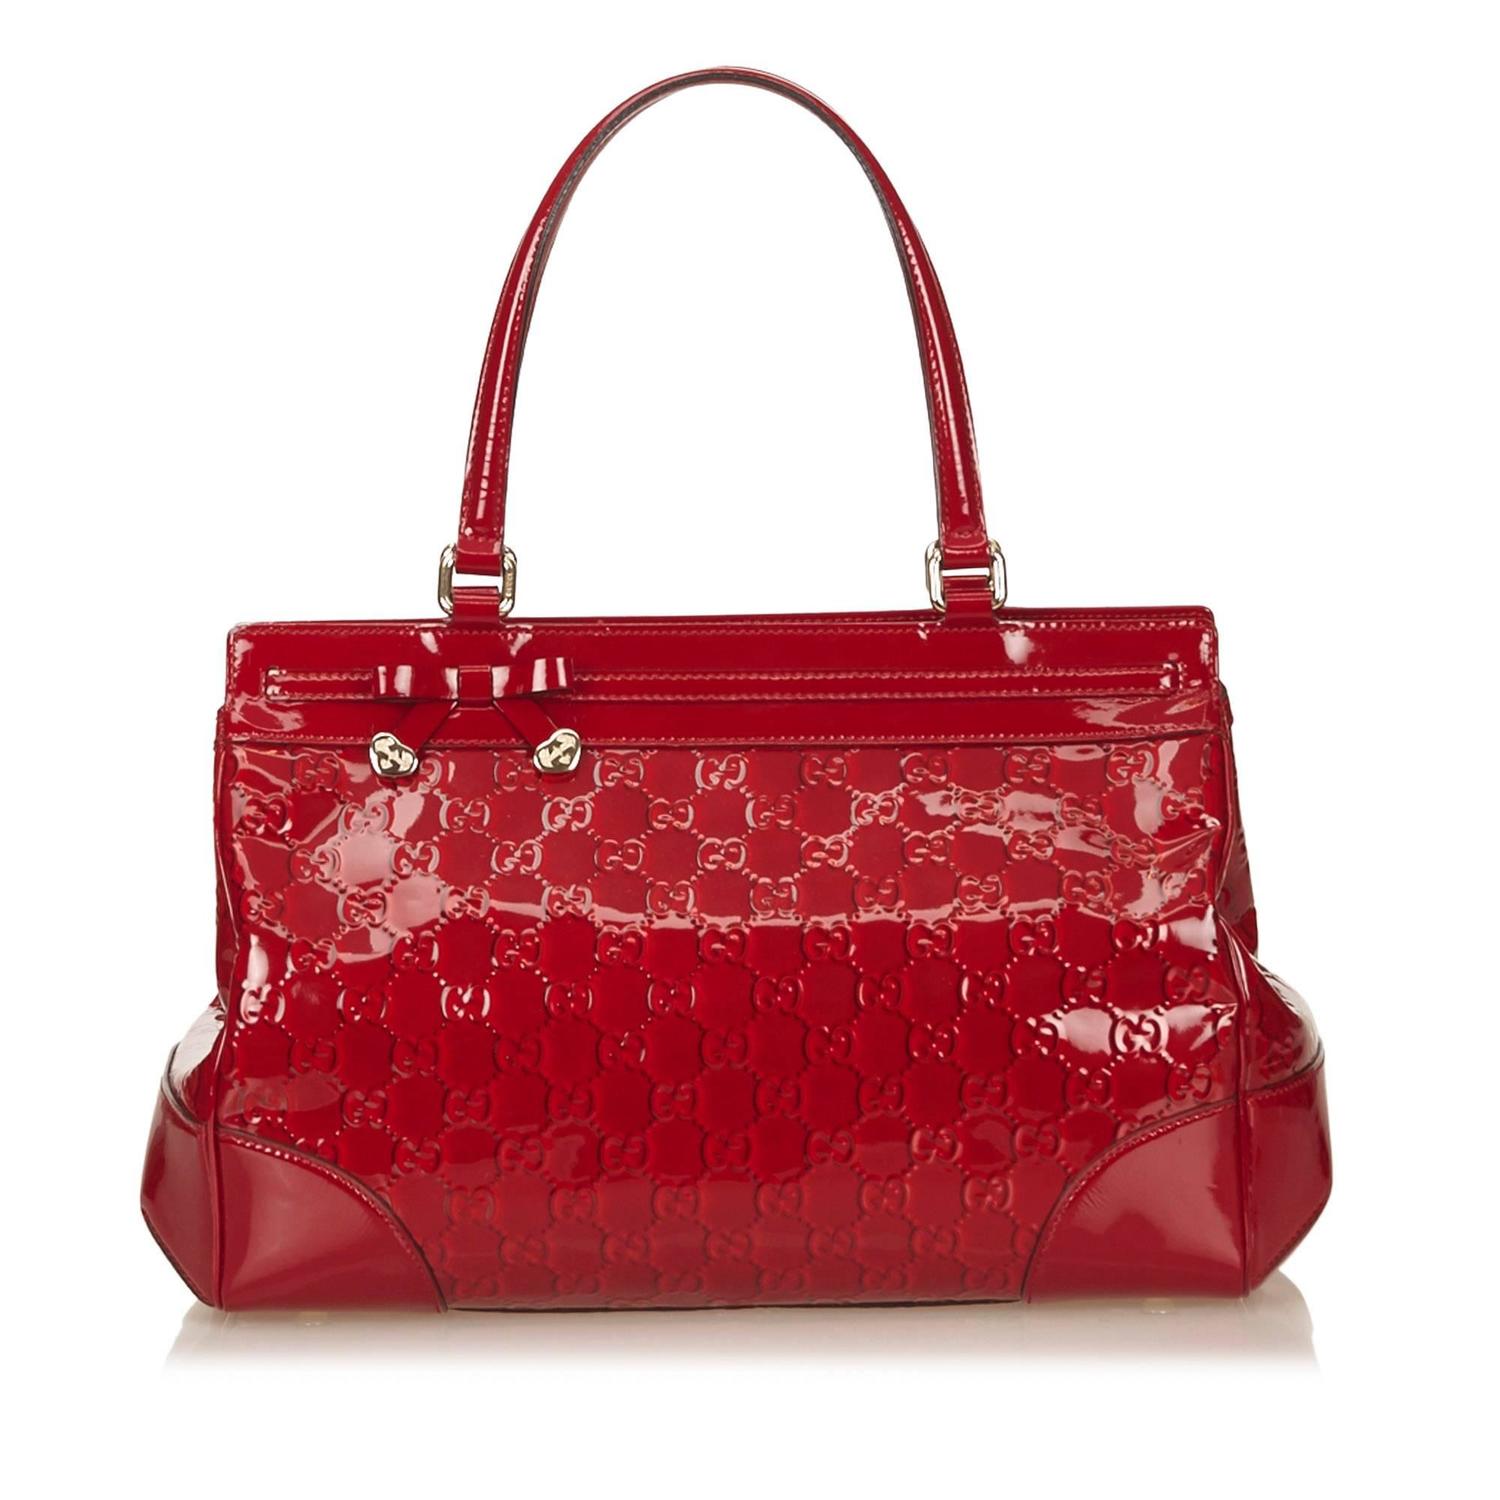 Gucci Red Patent Leather GG Handbag at 1stdibs